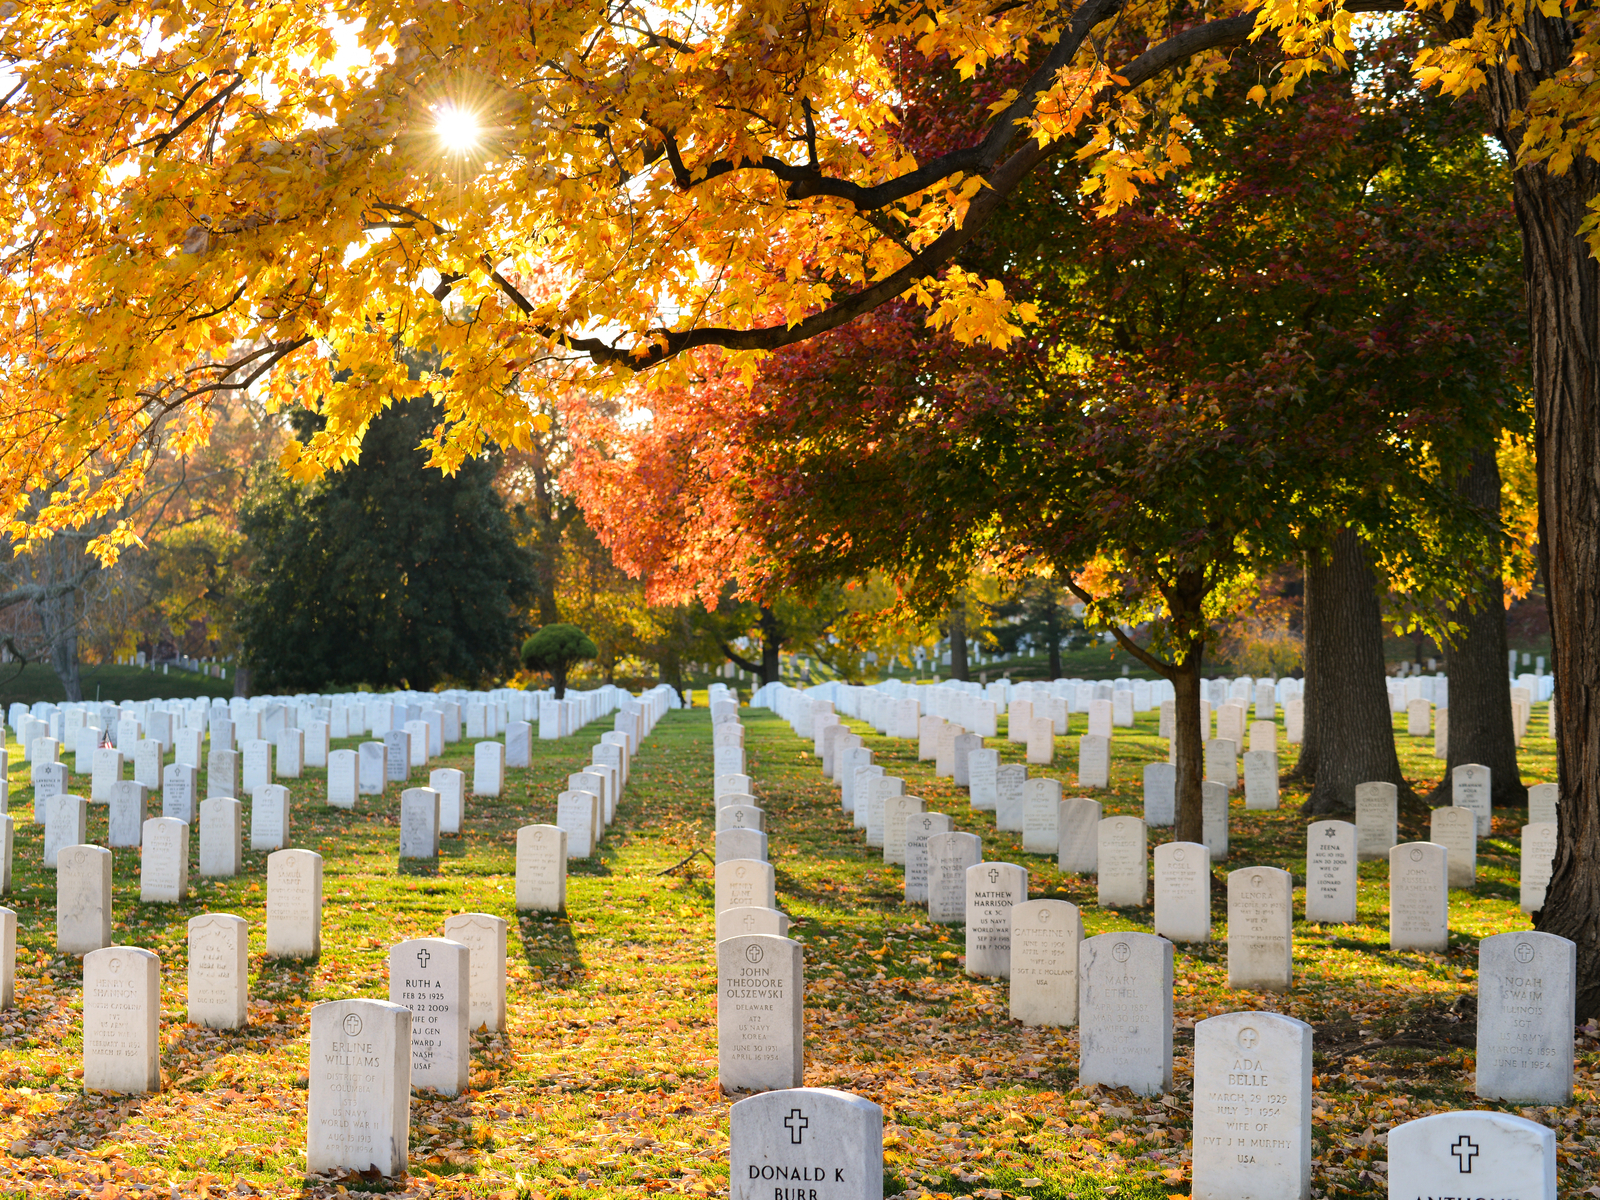 Visiting thousands of gravestones are one of the best things to do in Washington, D.C., Arlington National cemetery during autumn season